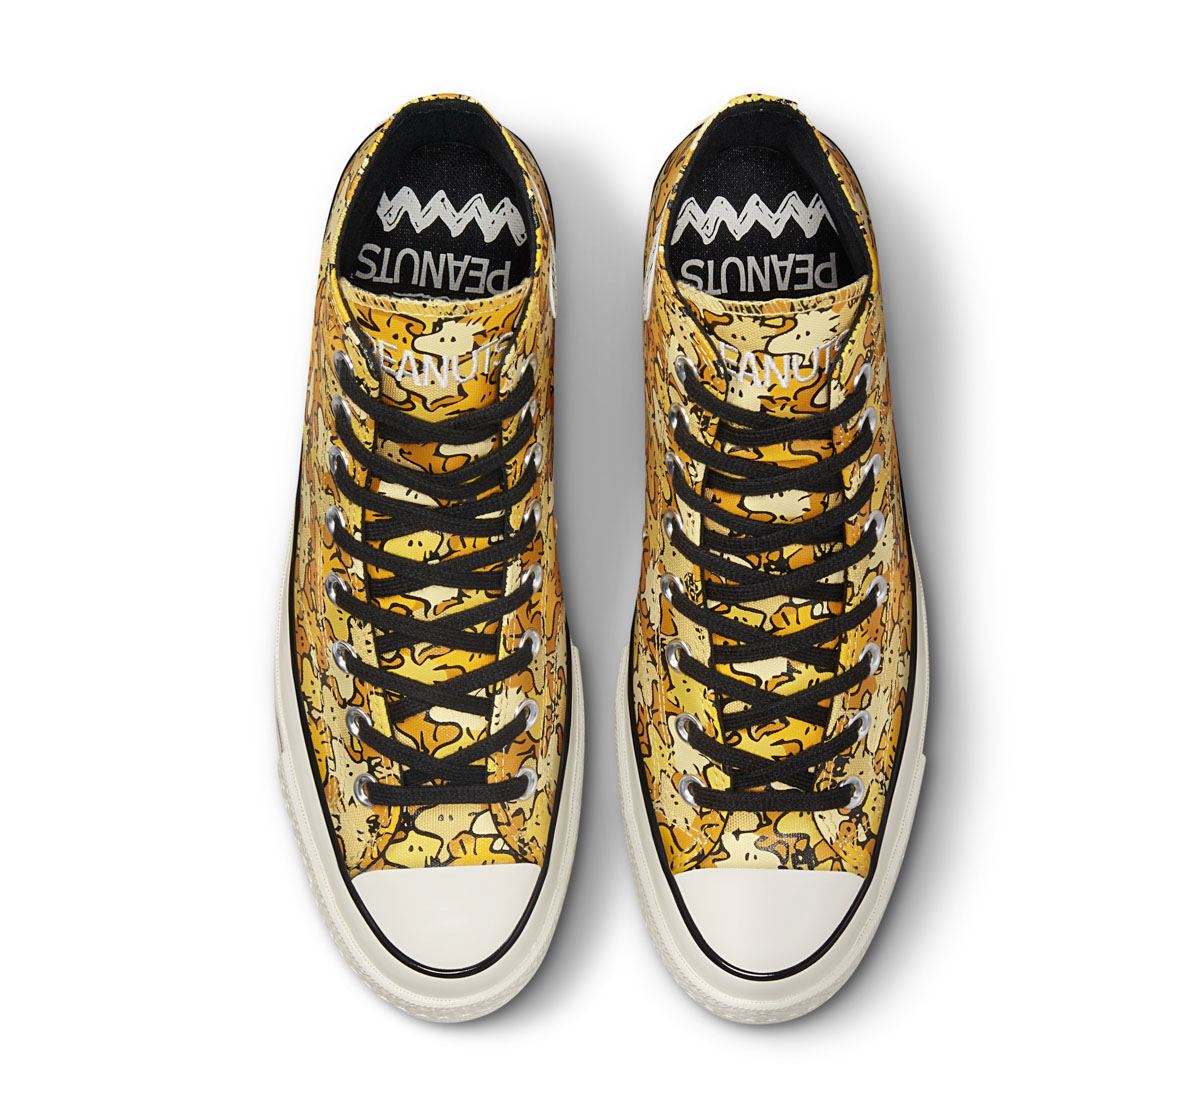 The Limited Edition Converse x Peanuts Collection Launches 24 May 2022 ...